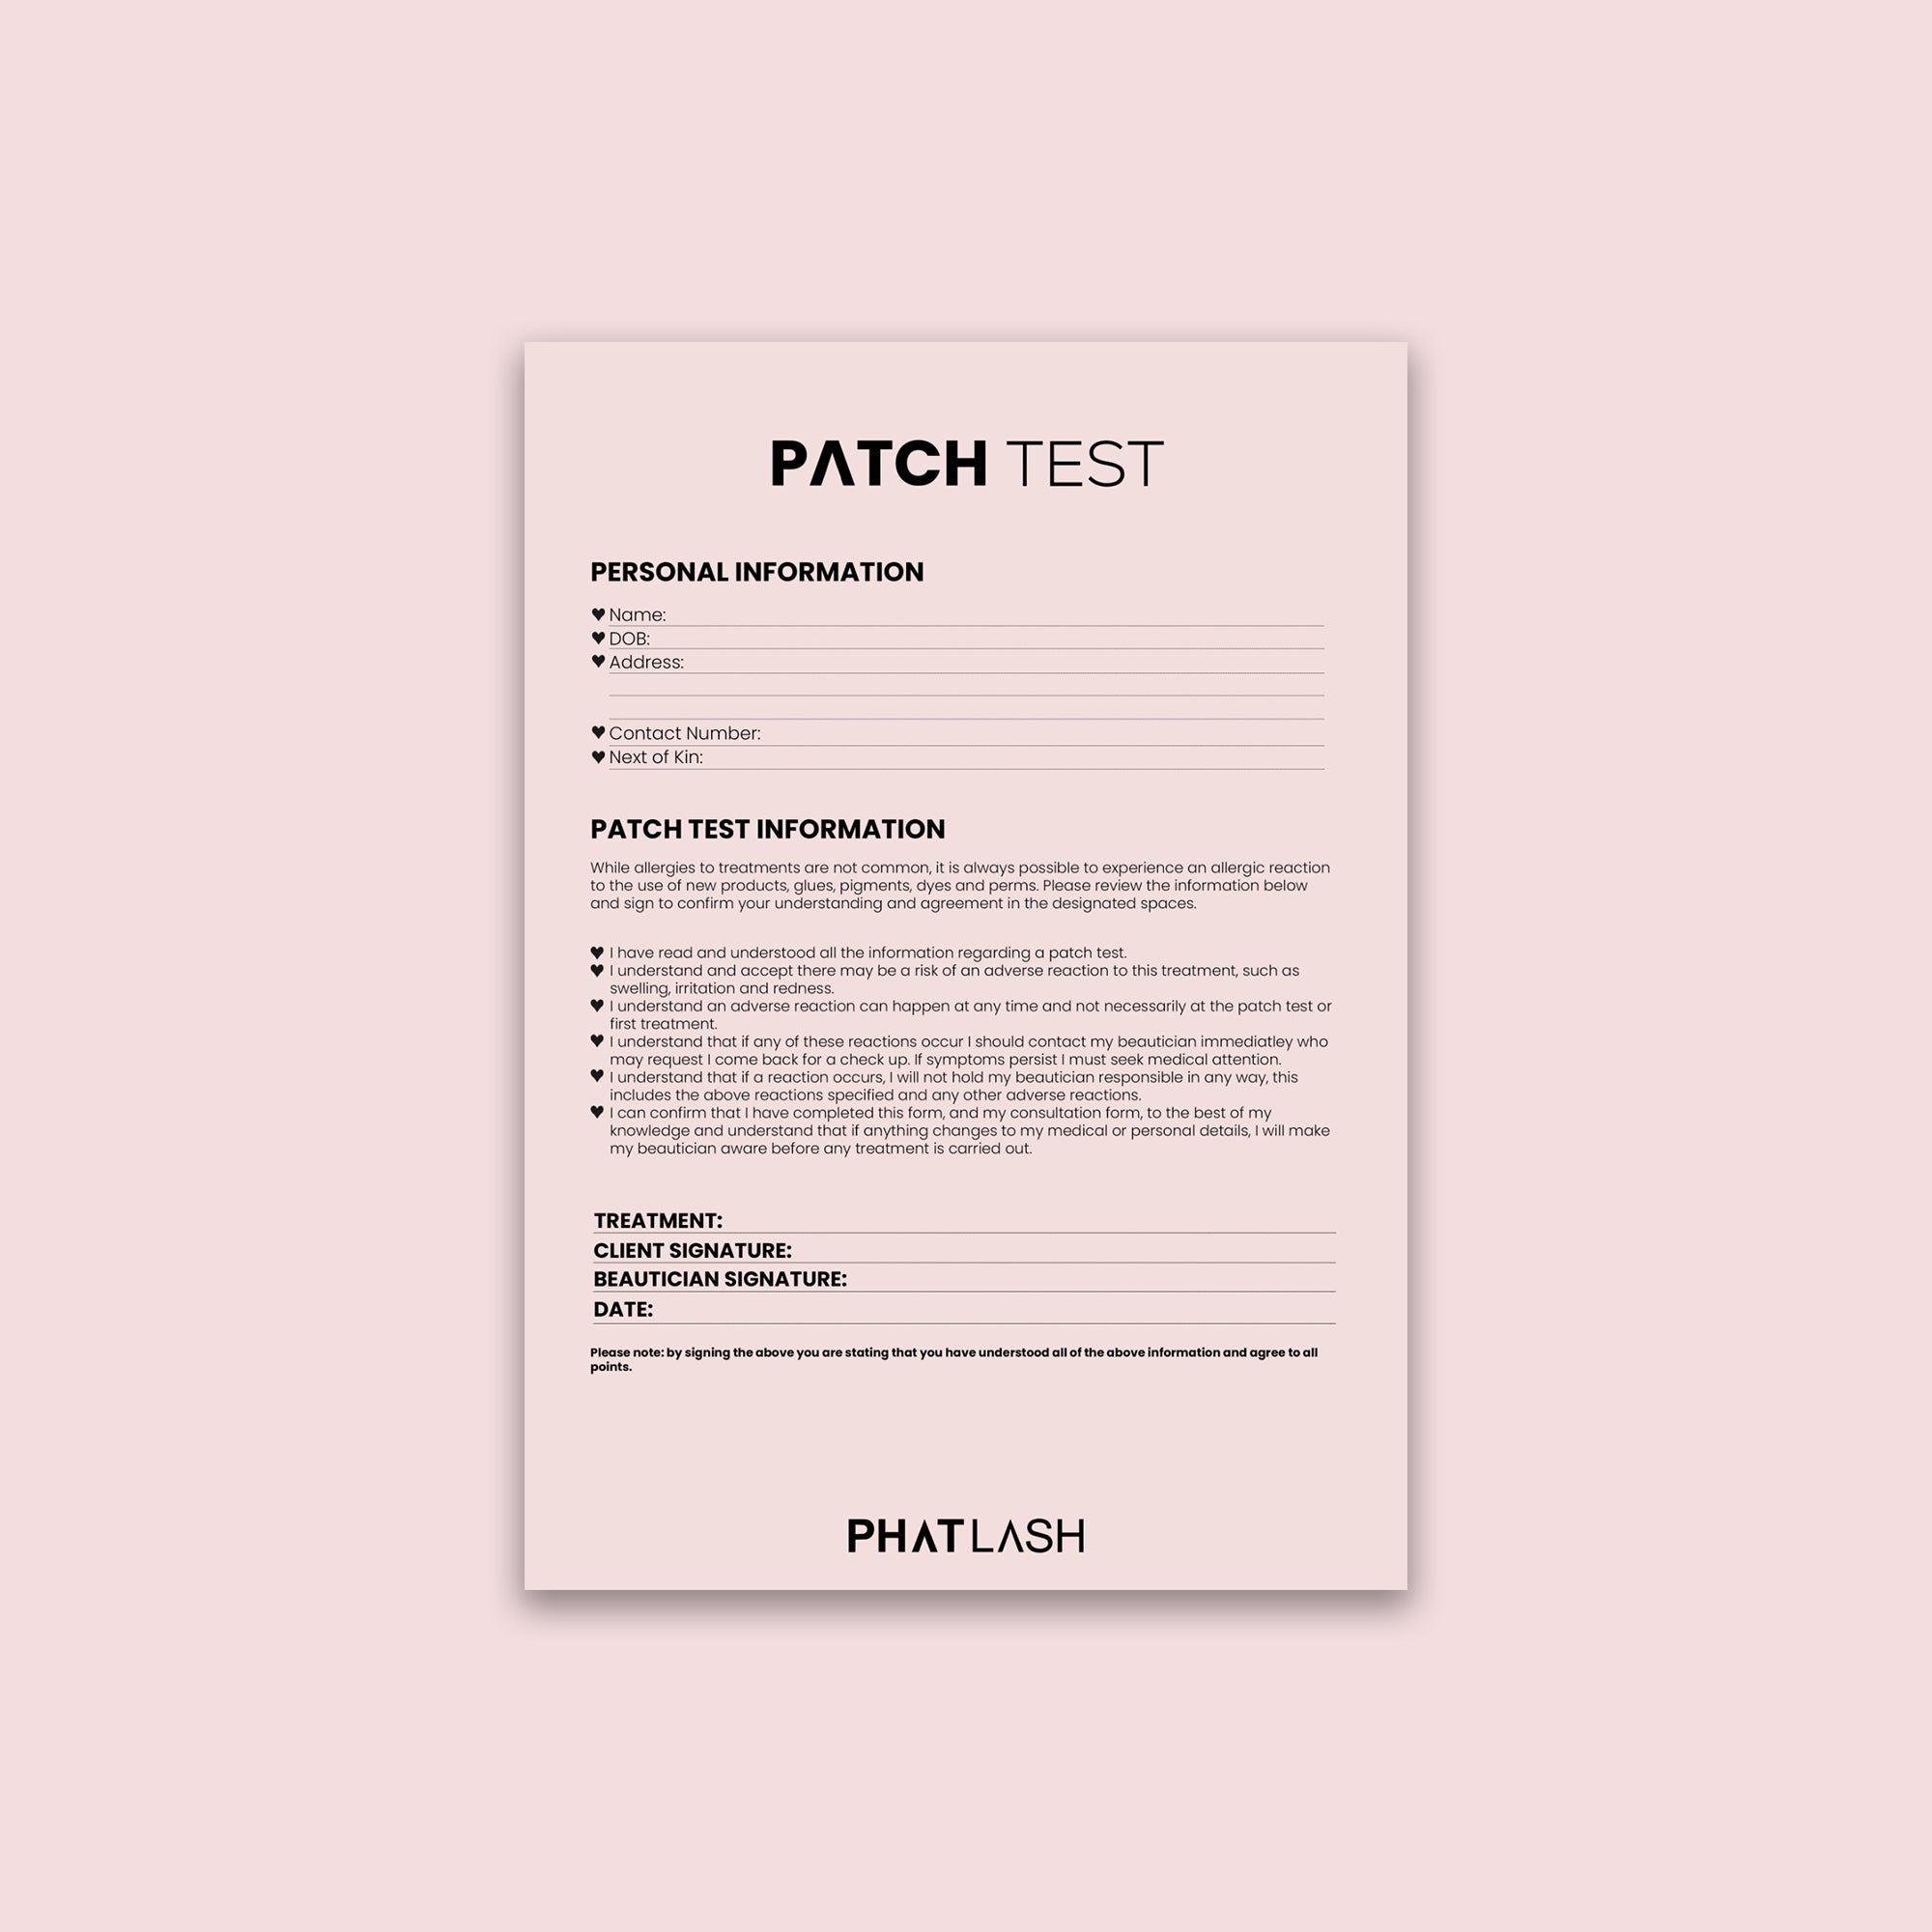 PATCH TEST GENERAL FORM